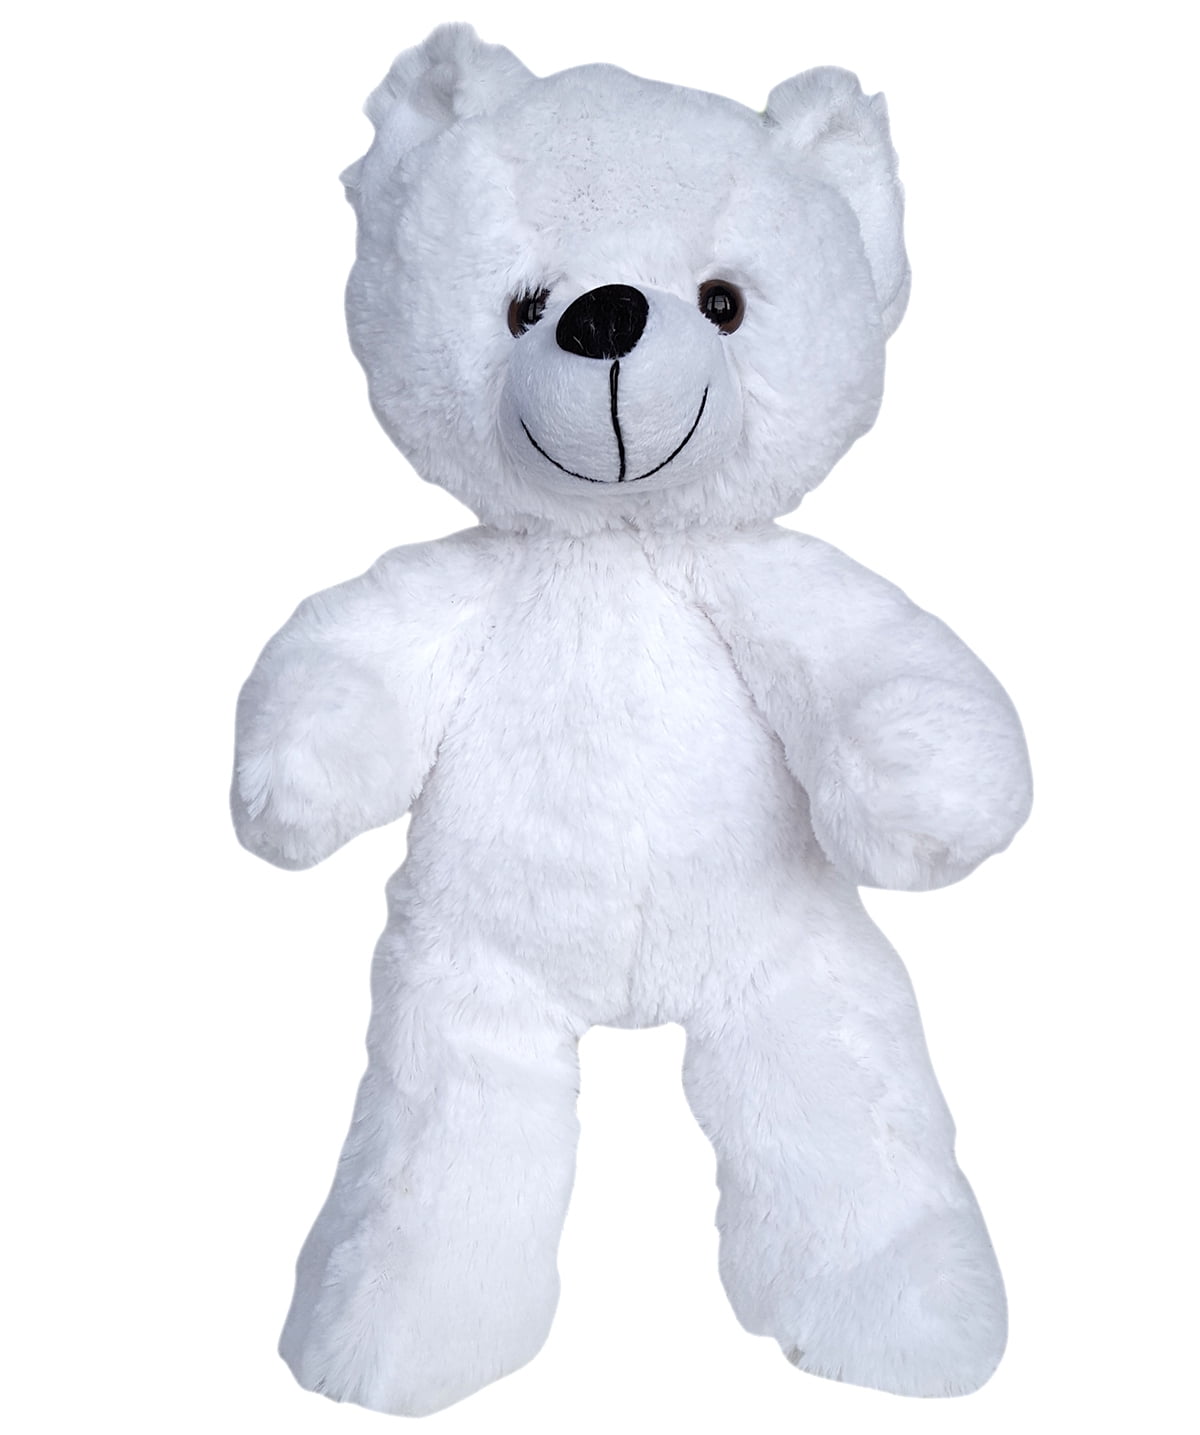 Details about   Care Bears 16" Bedtime Bear Plush Large Stuffed Animal Cuddly Soft & Huggable 